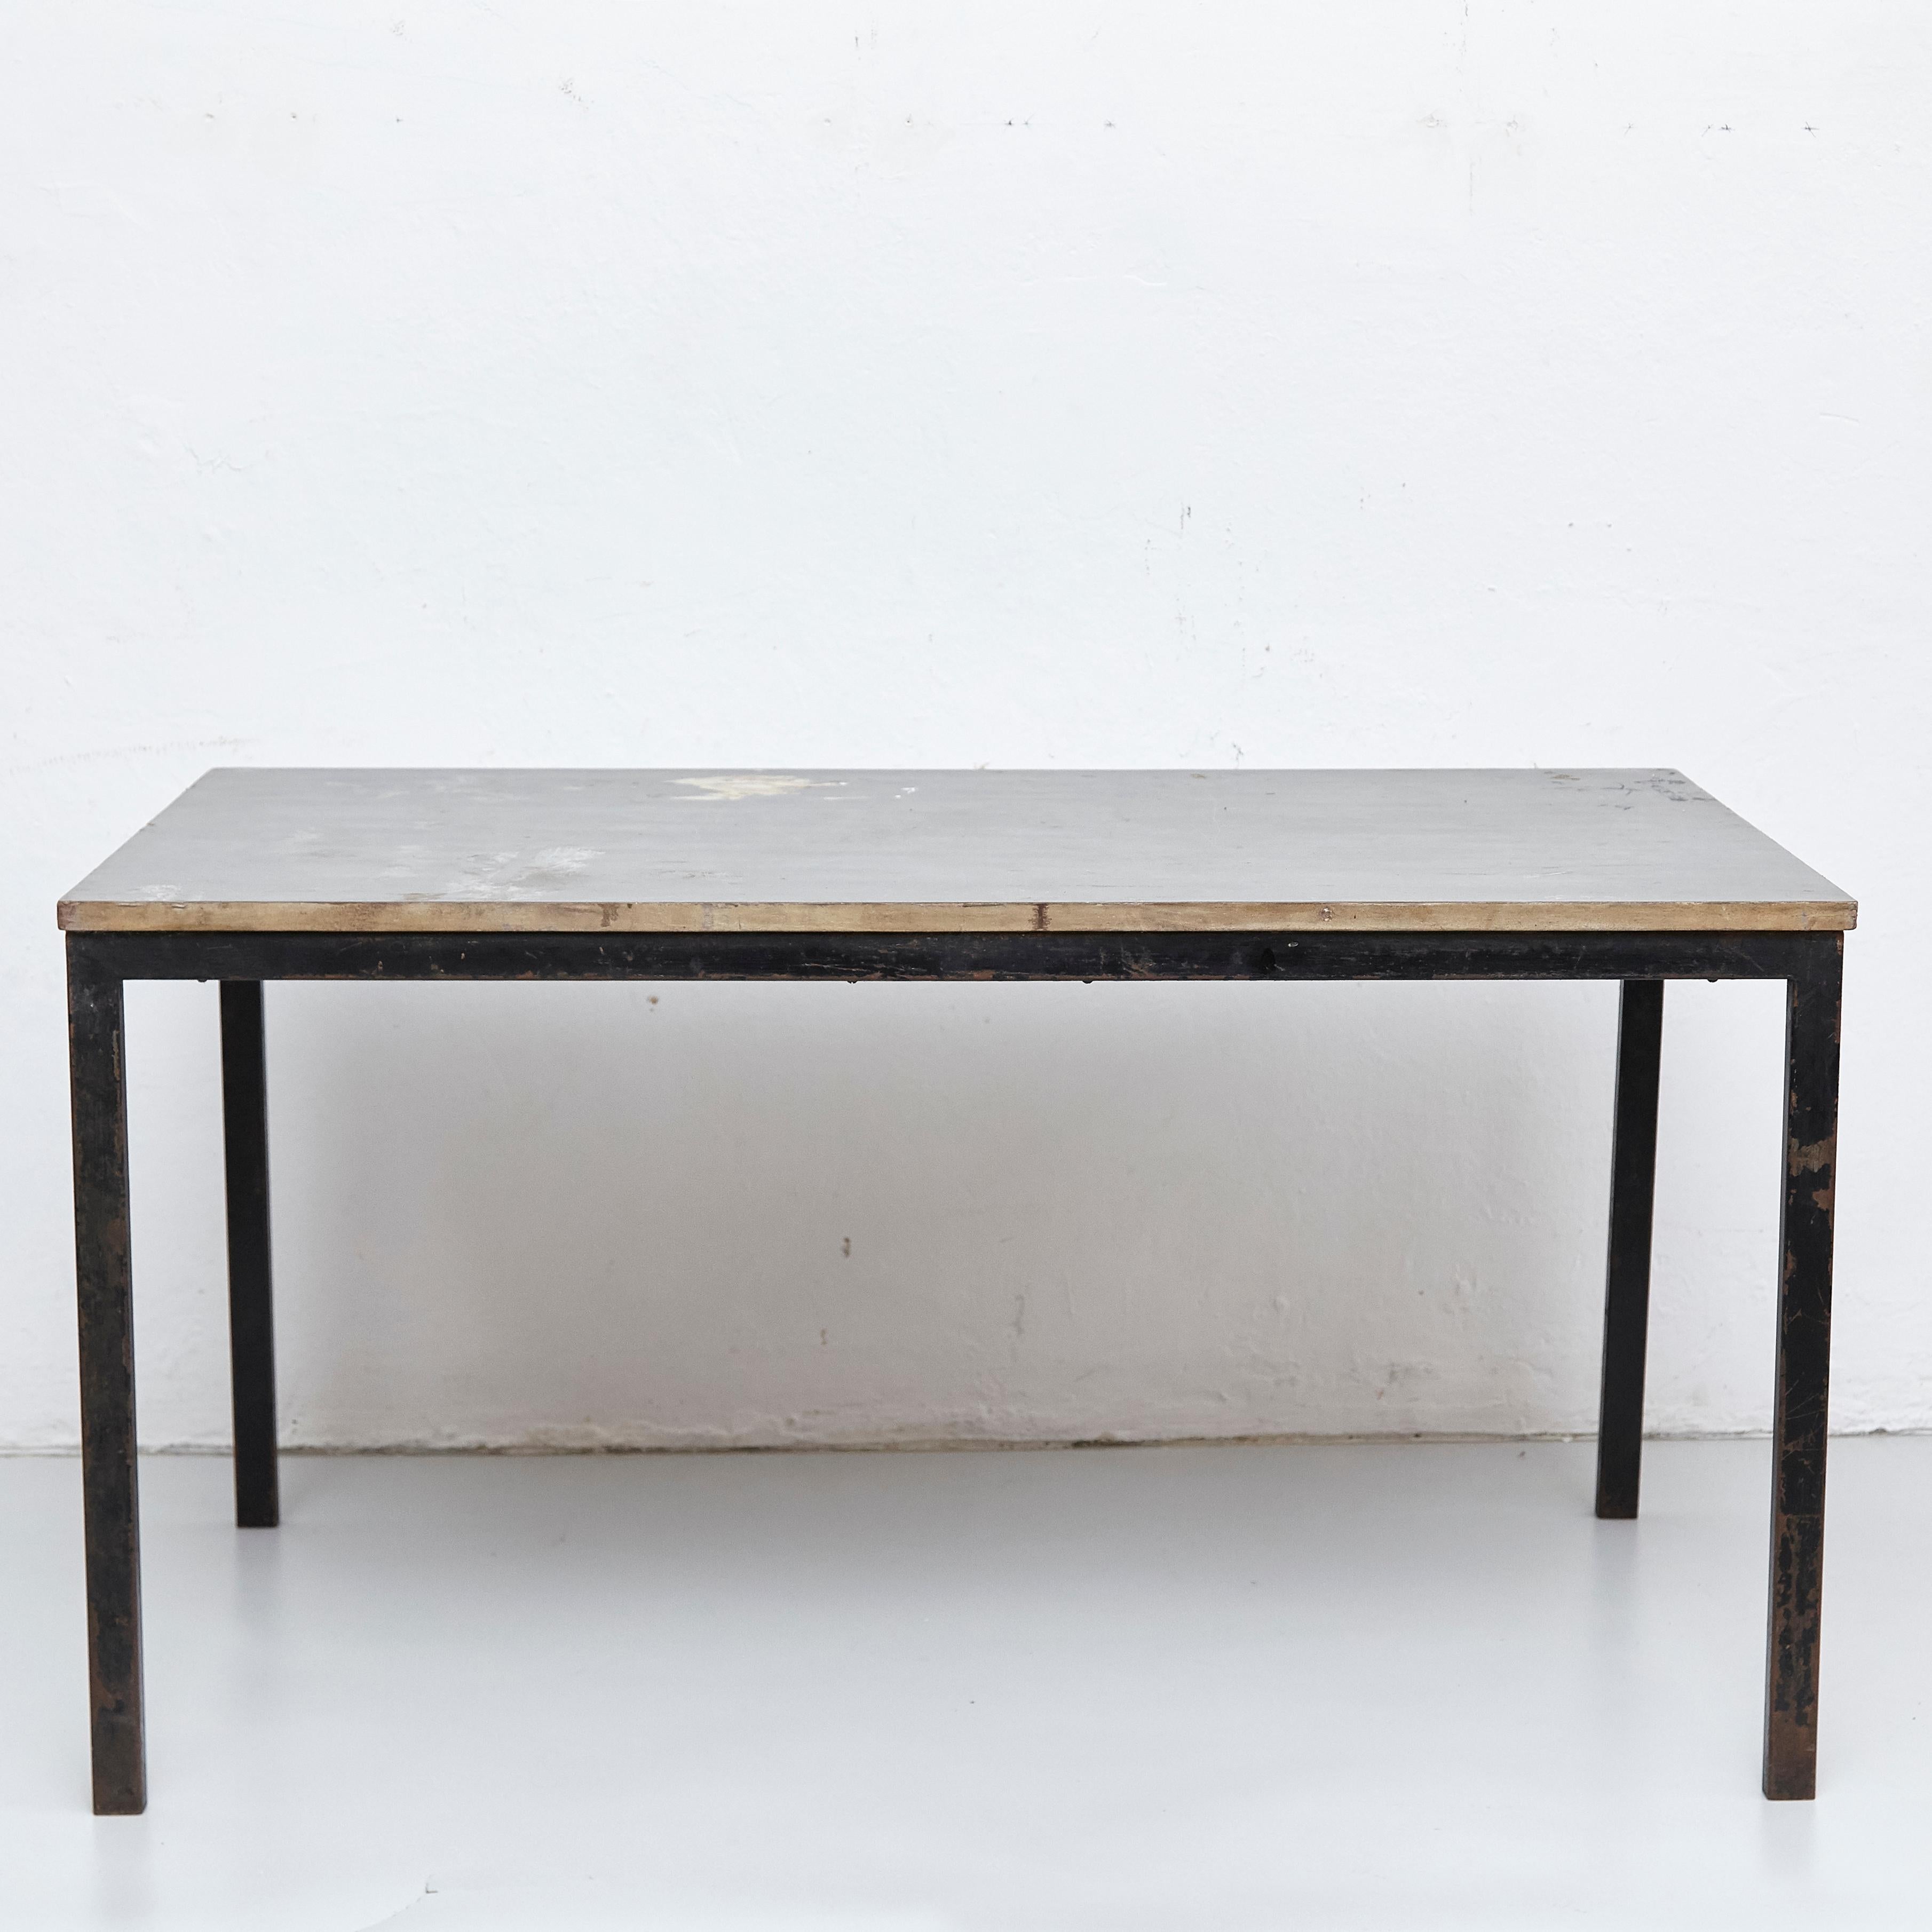 Table designed by Charlotte Perriand, circa 1950.

Wood, metal frame legs.

Provenance: Cansado, Mauritania (Africa).

In original condition, with wear consistent with age and use, preserving a beautiful patina. 

Charlotte Perriand